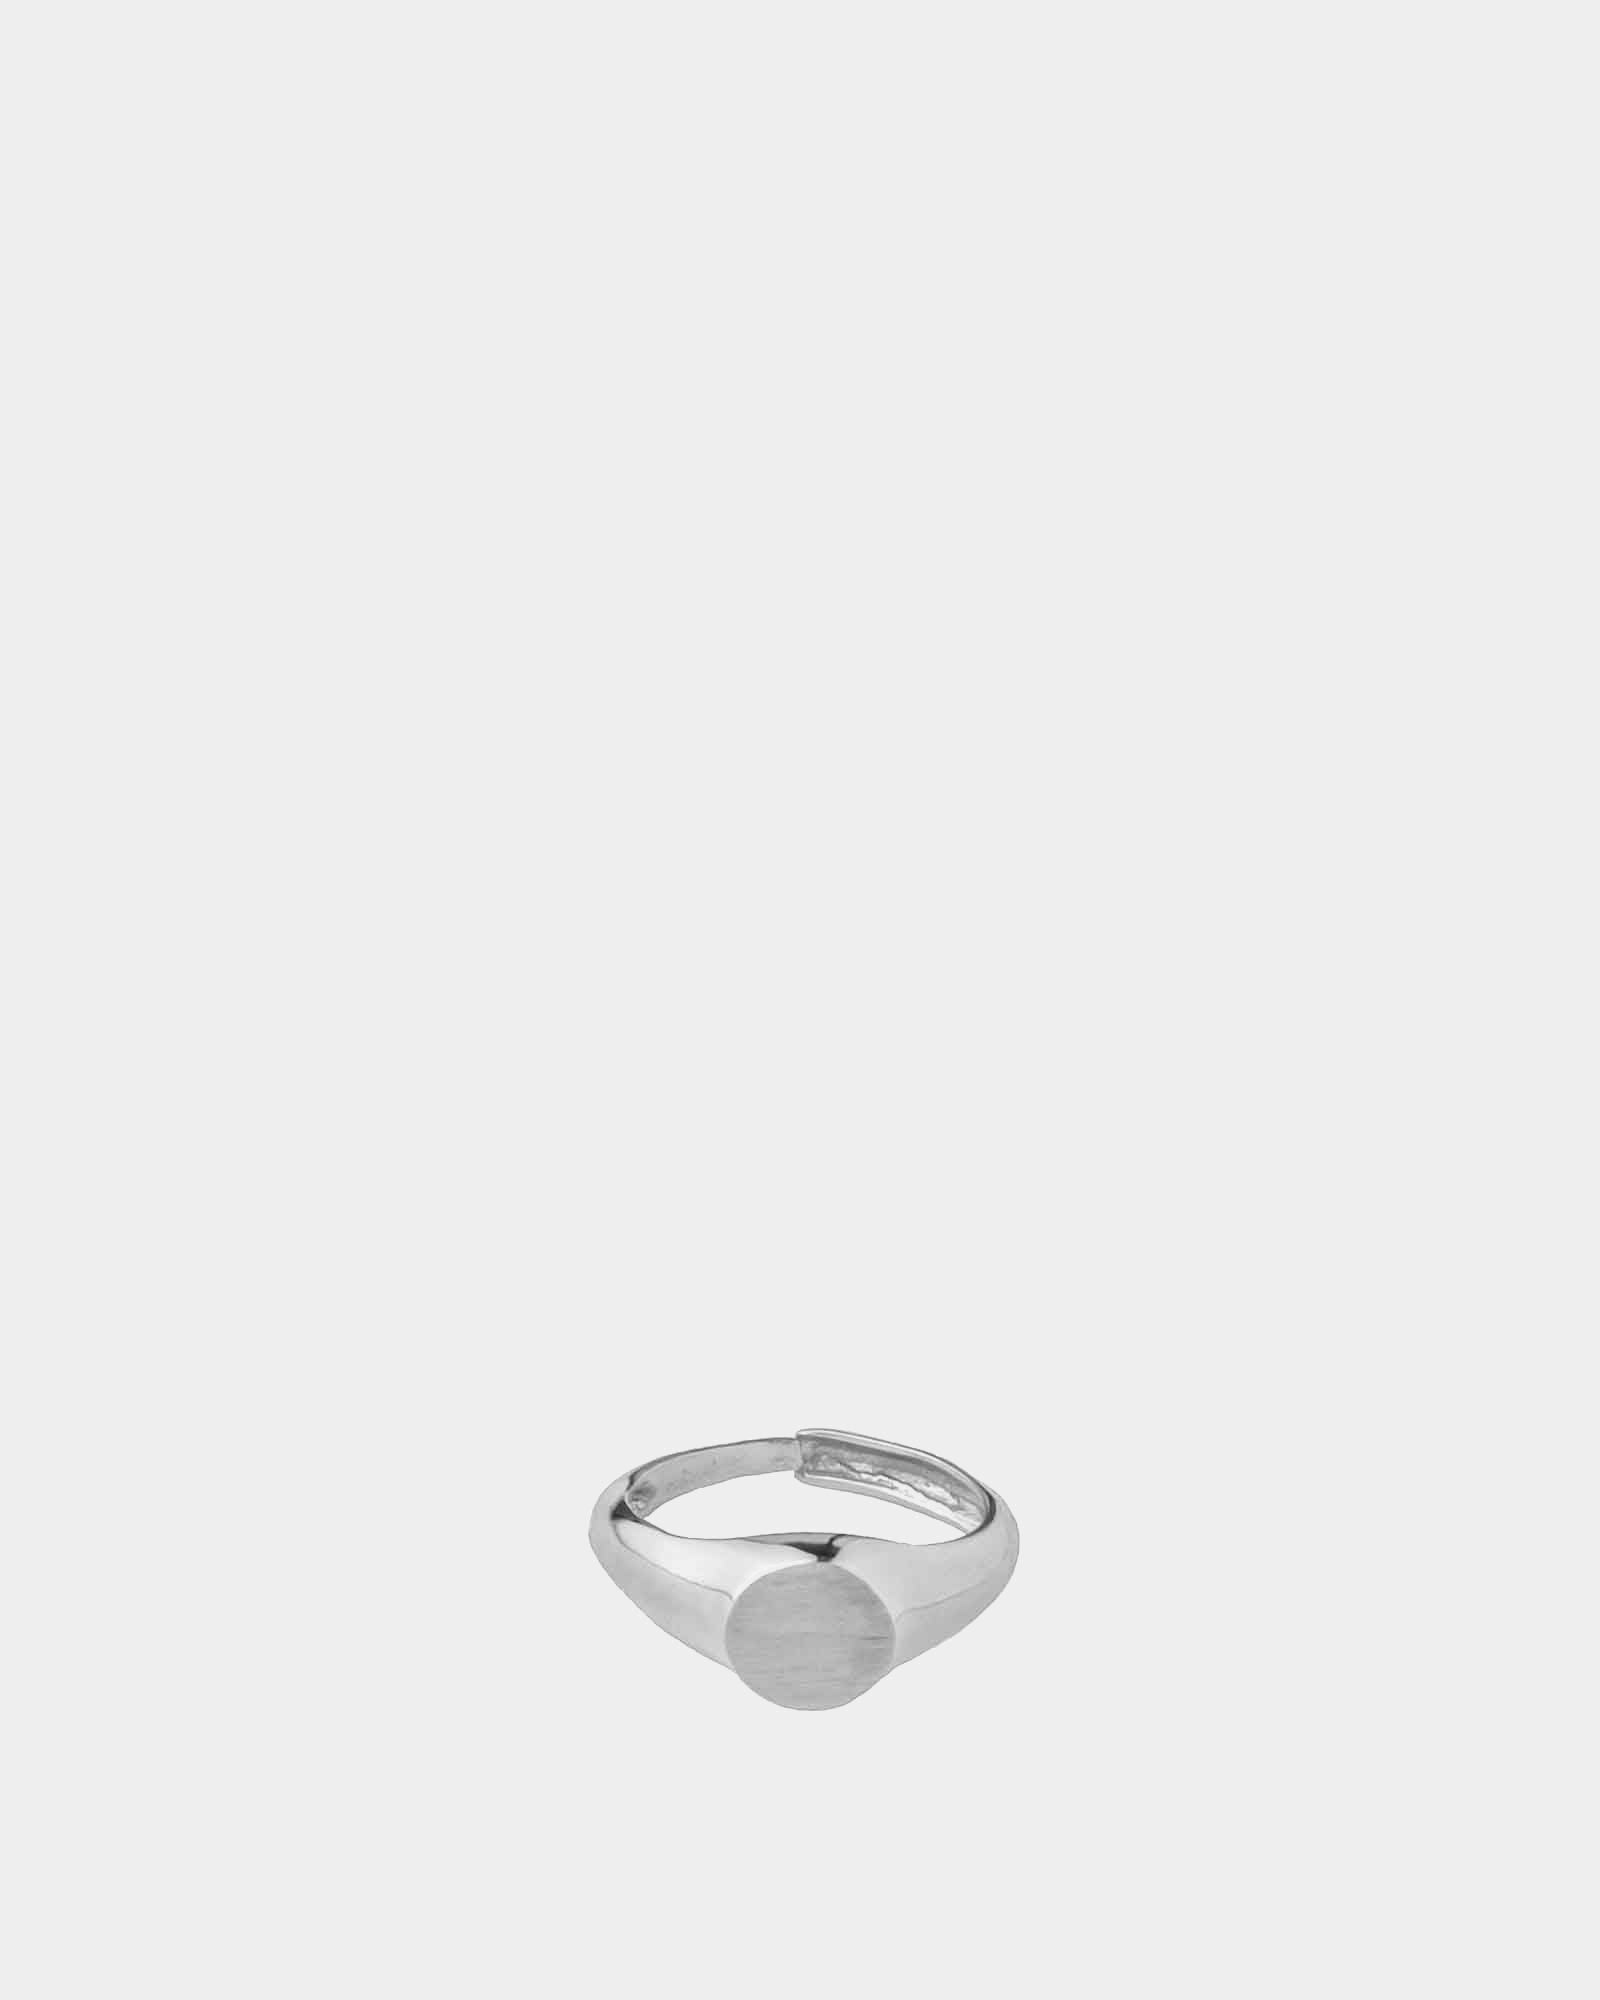 Coiba - Signet Ring in 925 Sterling Silver - Online Jewelry - Dicci